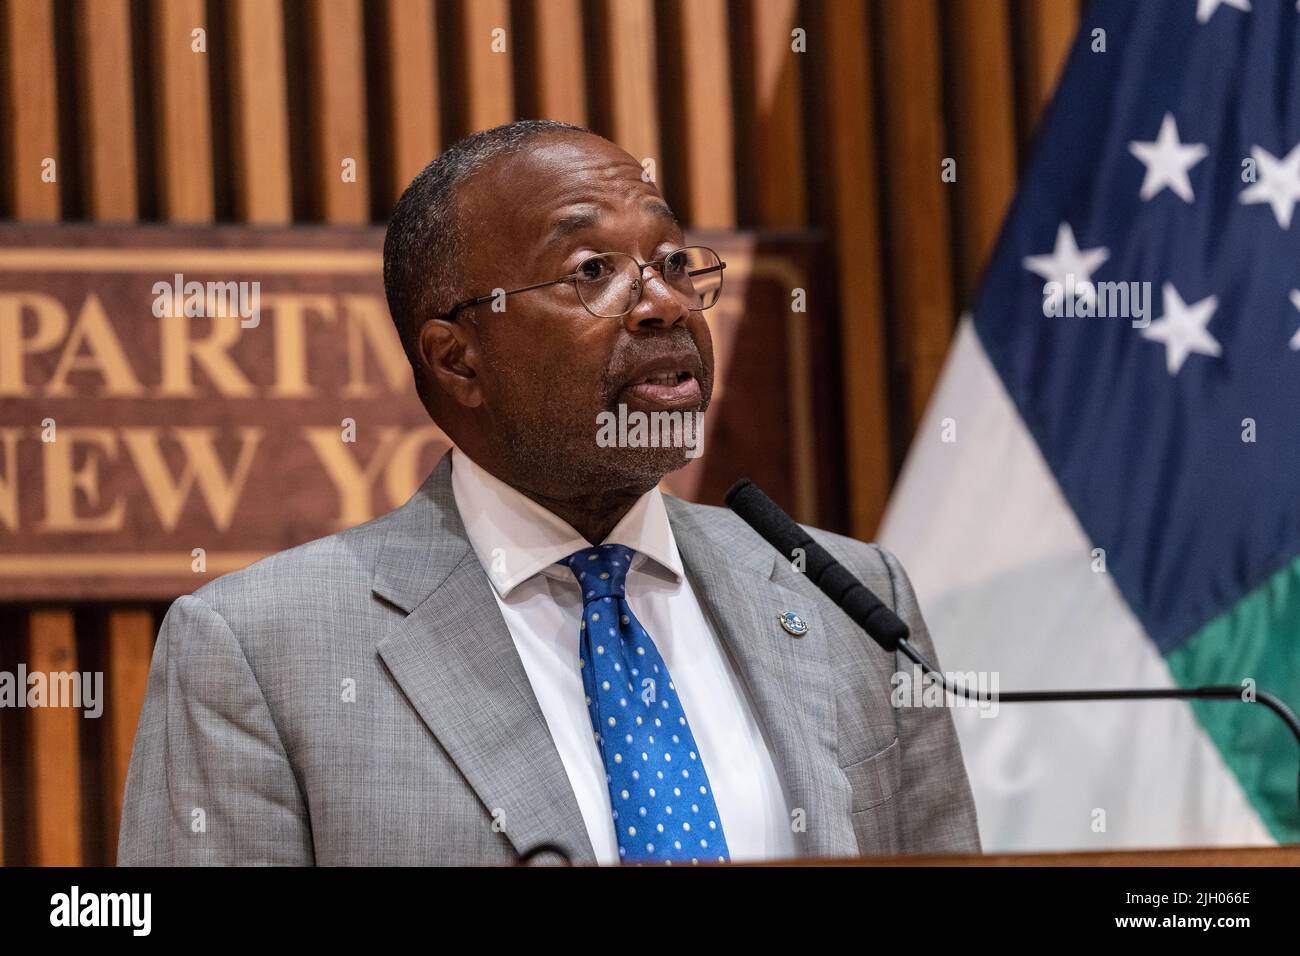 New York, NY - July 13, 2022: Deputy Commissioner of Public Information Julian Phillips speaks during press conference an ongoing investigation at One Police Plaza Stock Photo